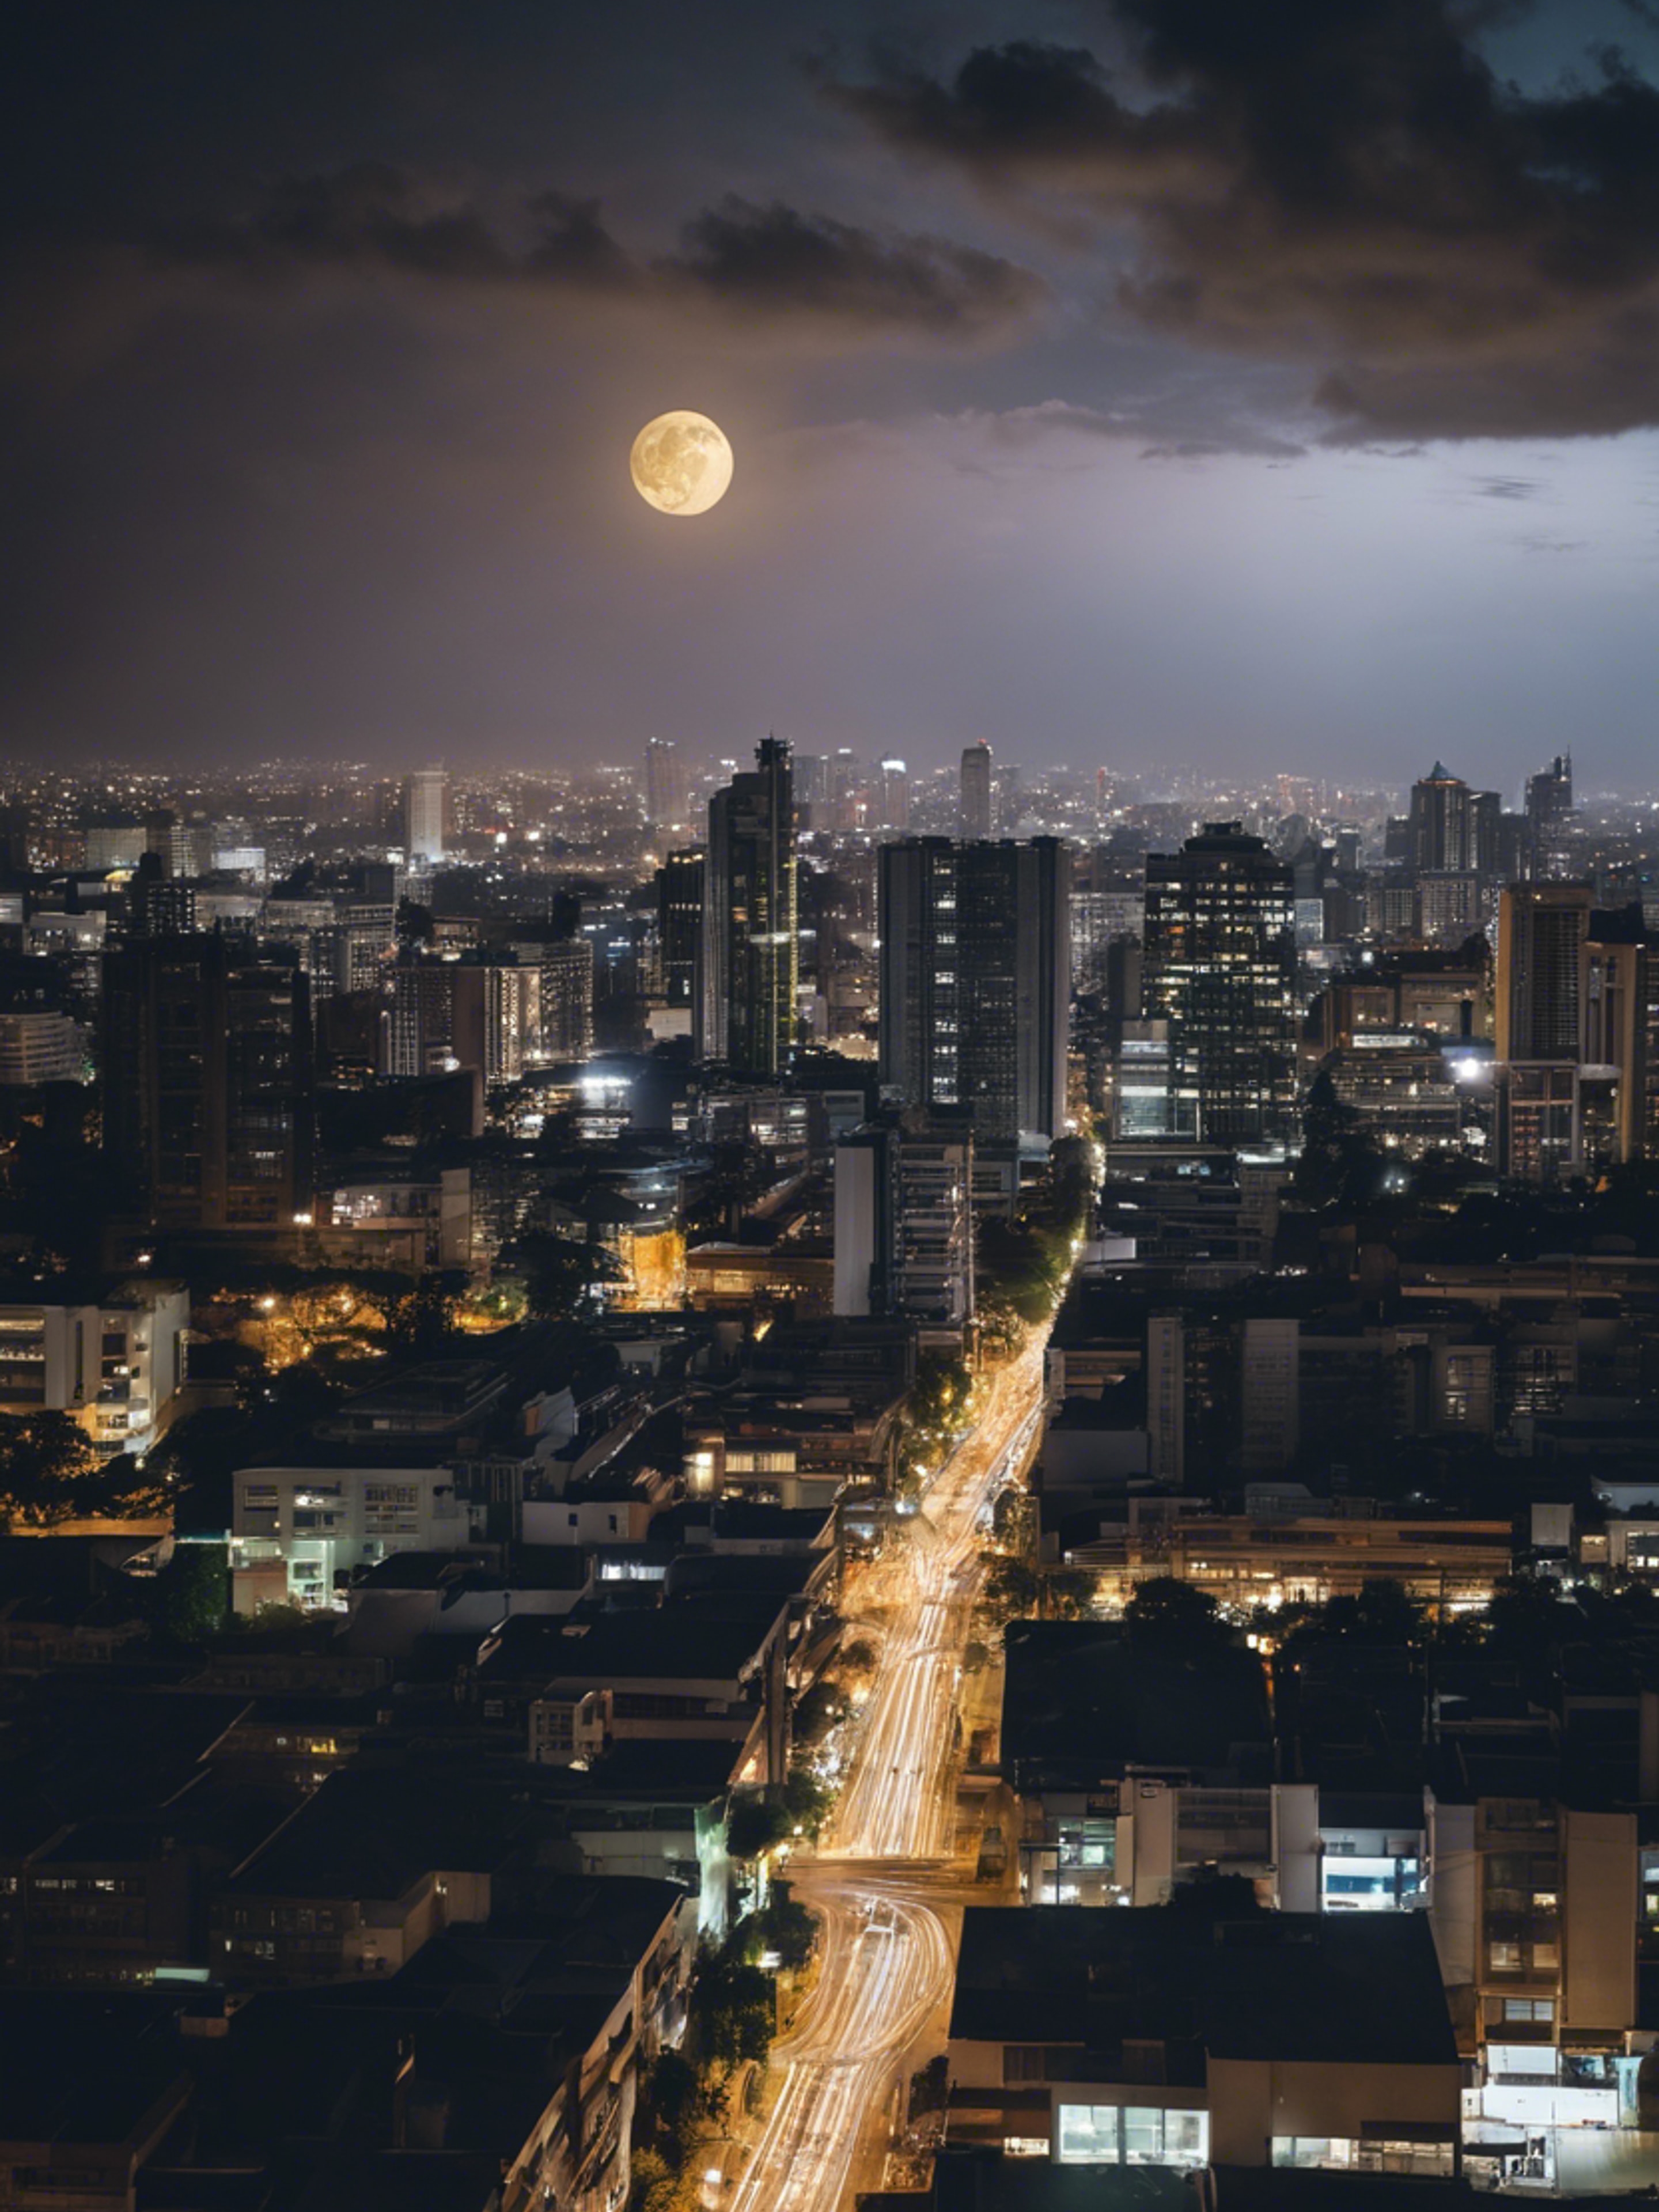 The grand Johannesburg skyline at night, with the moon peering from behind the clouds. Wallpaper[6cbf7c92797e41909c0c]